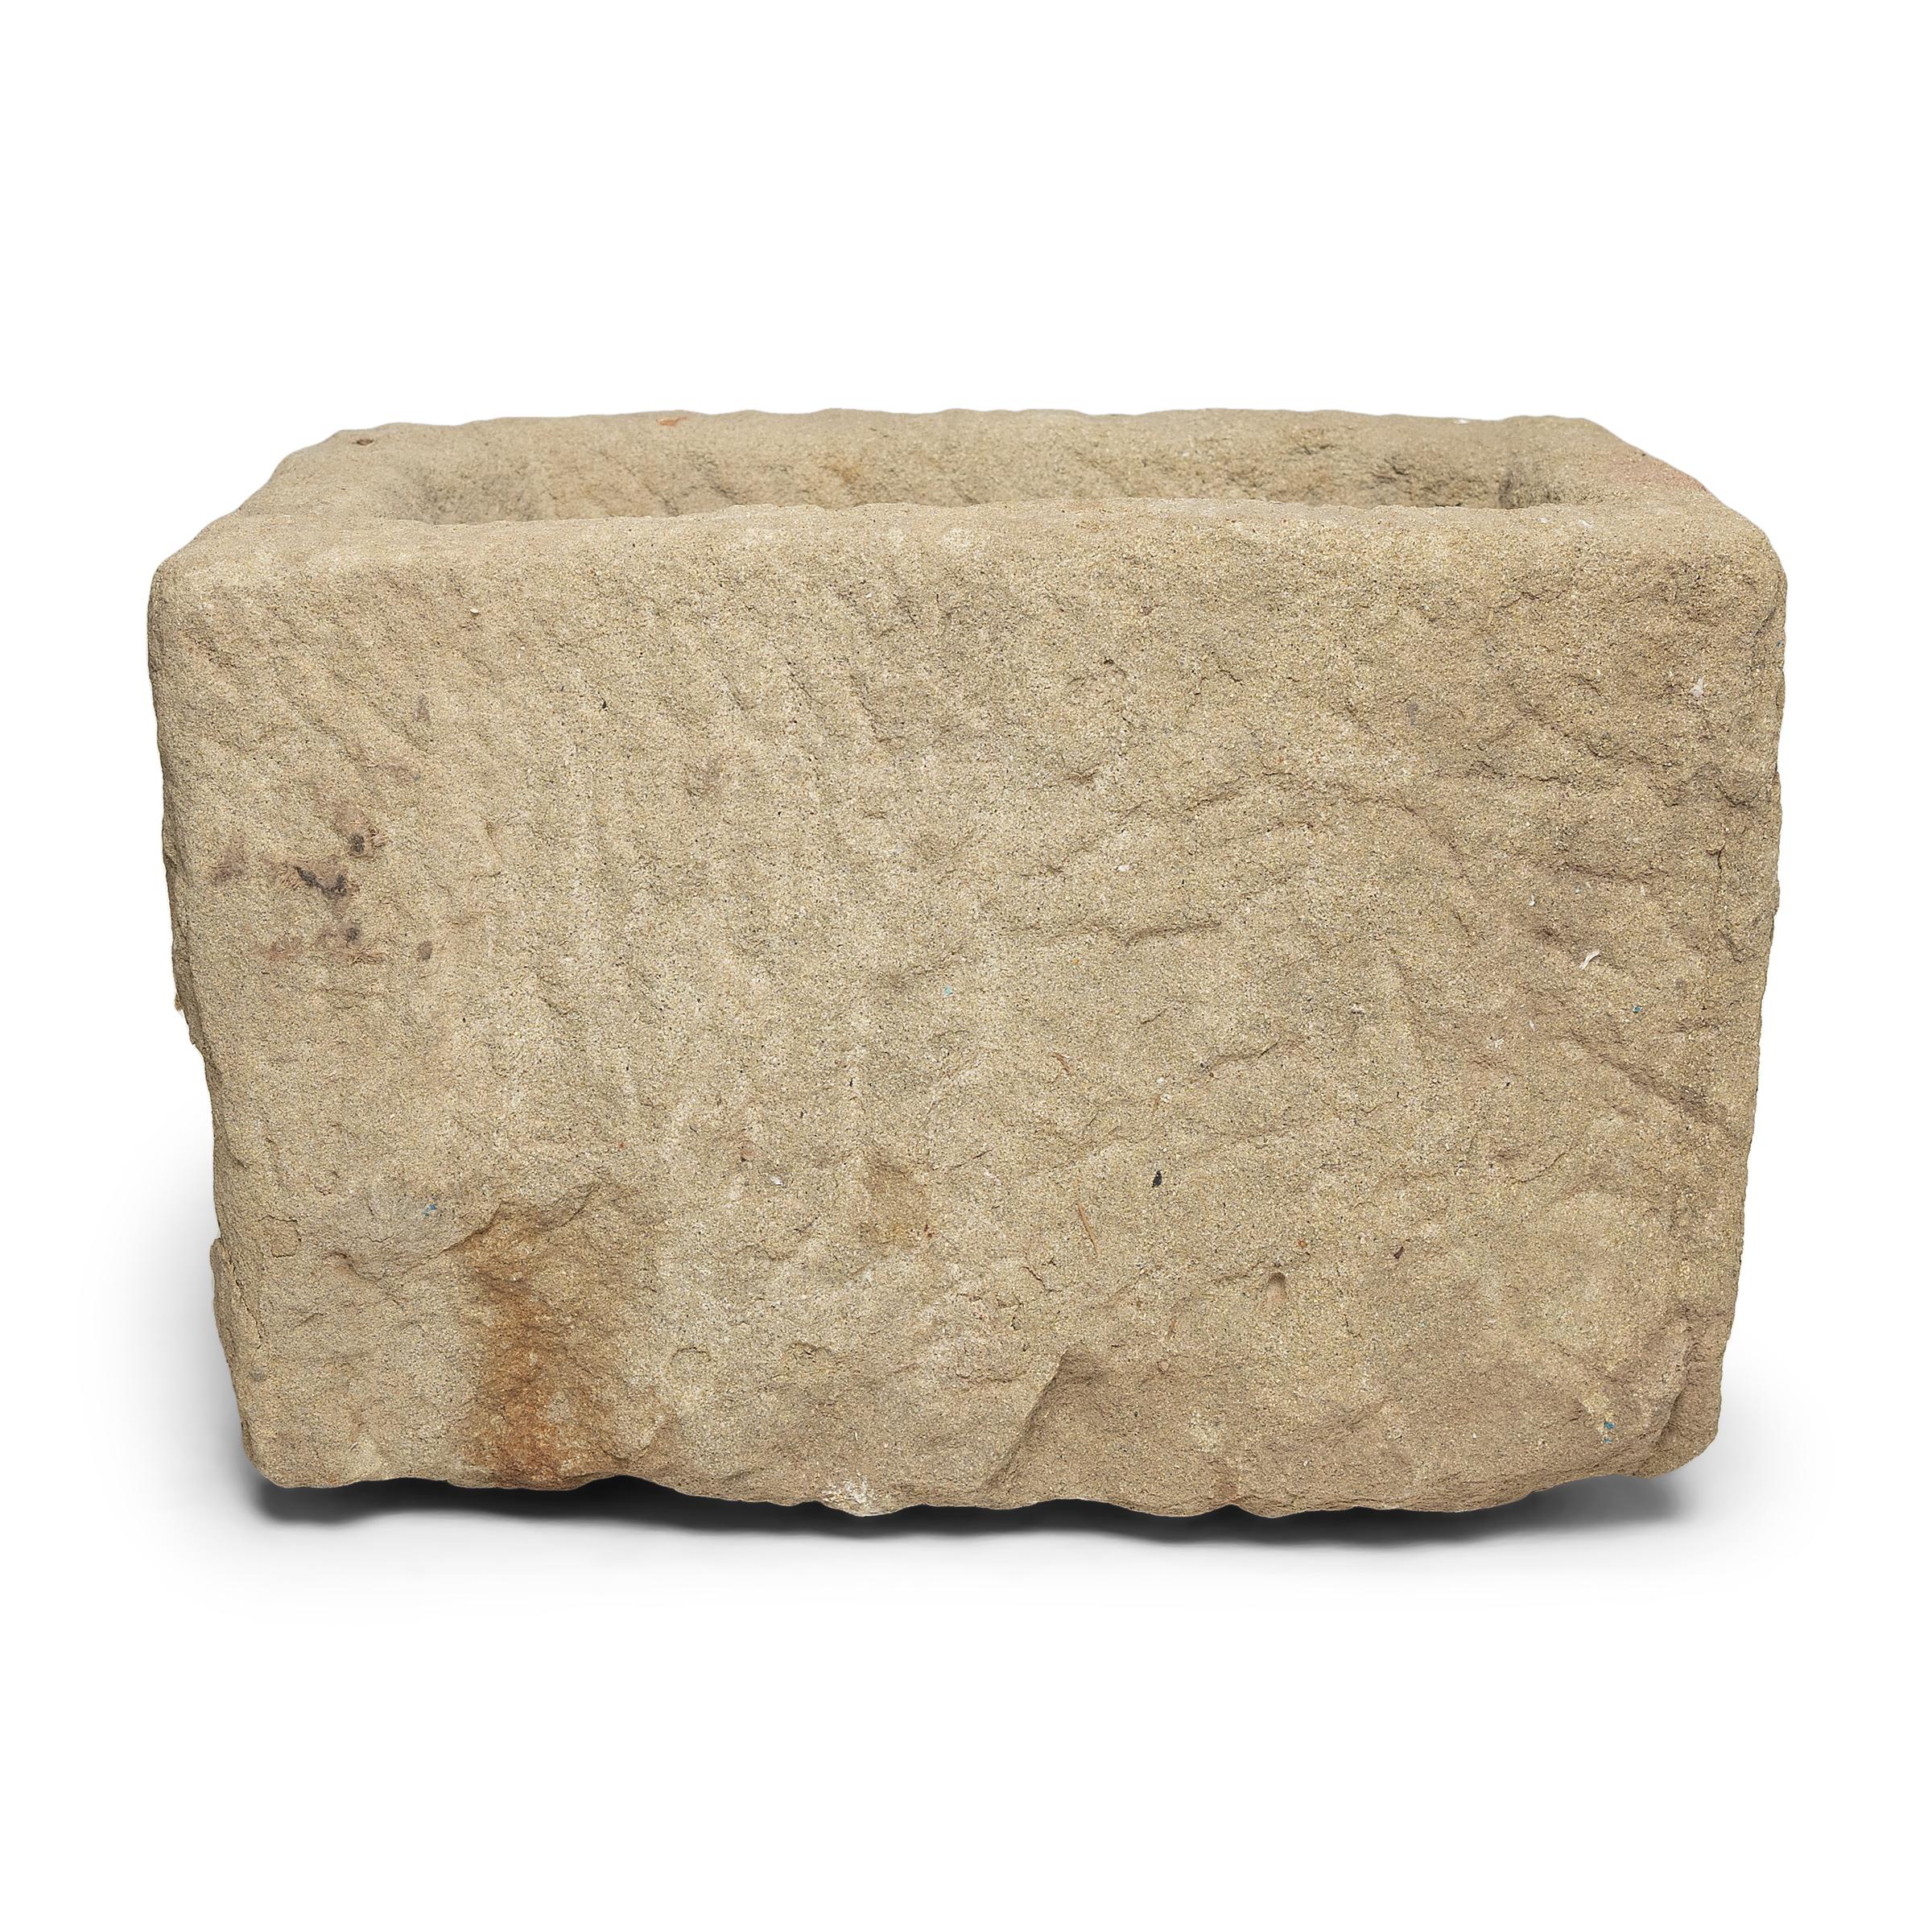 Once used on a Provincial Chinese farm to hold water or animal feed, this early 20th century stone trough is celebrated today for its organic form and rustic authenticity. hand carved from solid limestone, the trough has a rectangular form with